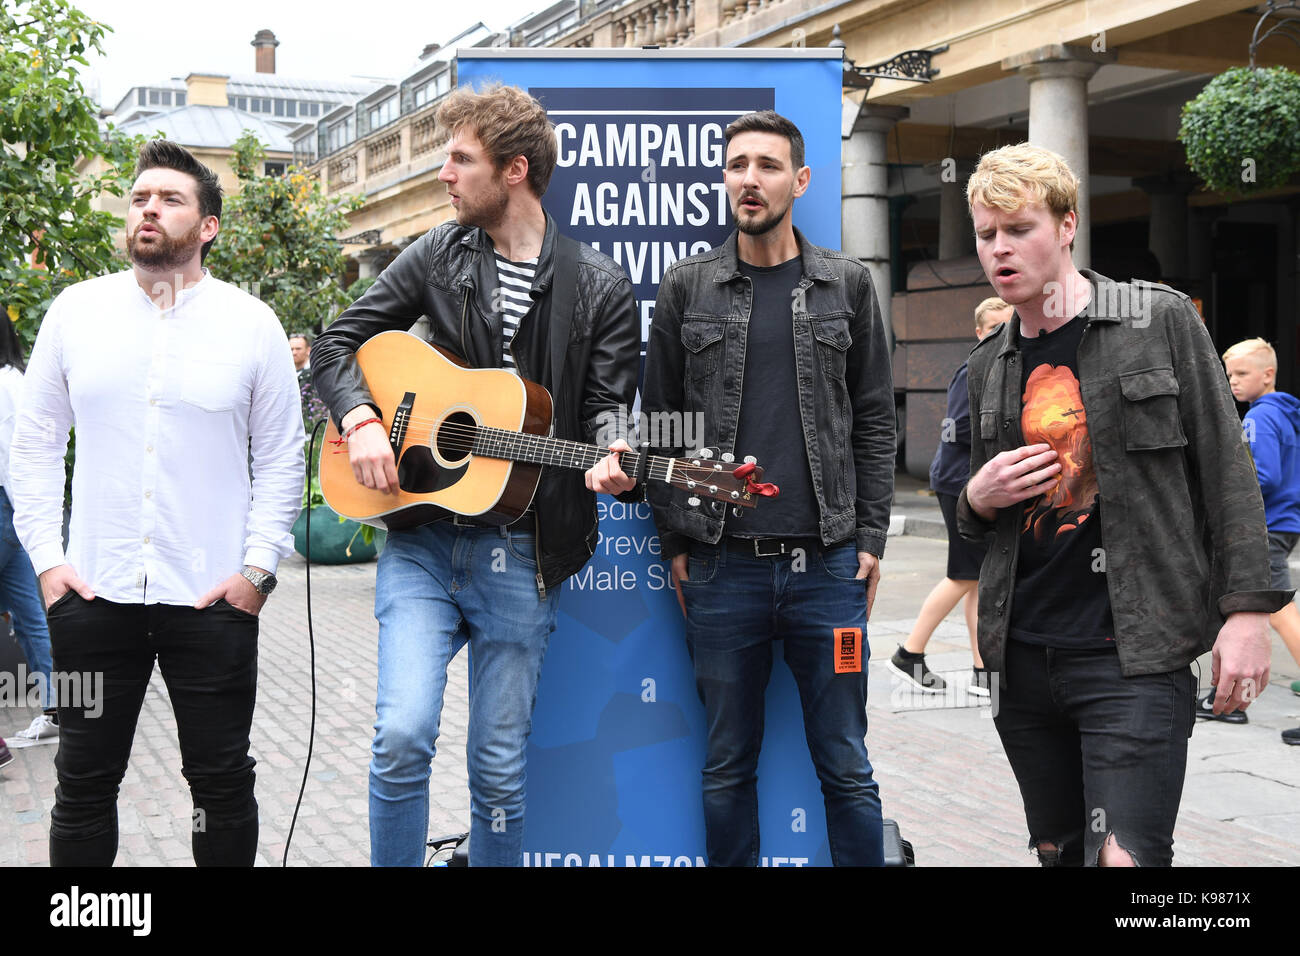 Irish rock band Kodaline busking at Tottenham Court Road Station and in Covent Garden in Central London to raise awareness for male suicide prevention charity CALM (Campaign Against Living Miserably).  Featuring: Kodaline, Steve Garrigan, Vinny May, Jr., Jason Boland, Mark Prendergast Where: London, United Kingdom When: 22 Aug 2017 Credit: Carsten Windhorst/WENN.com Stock Photo